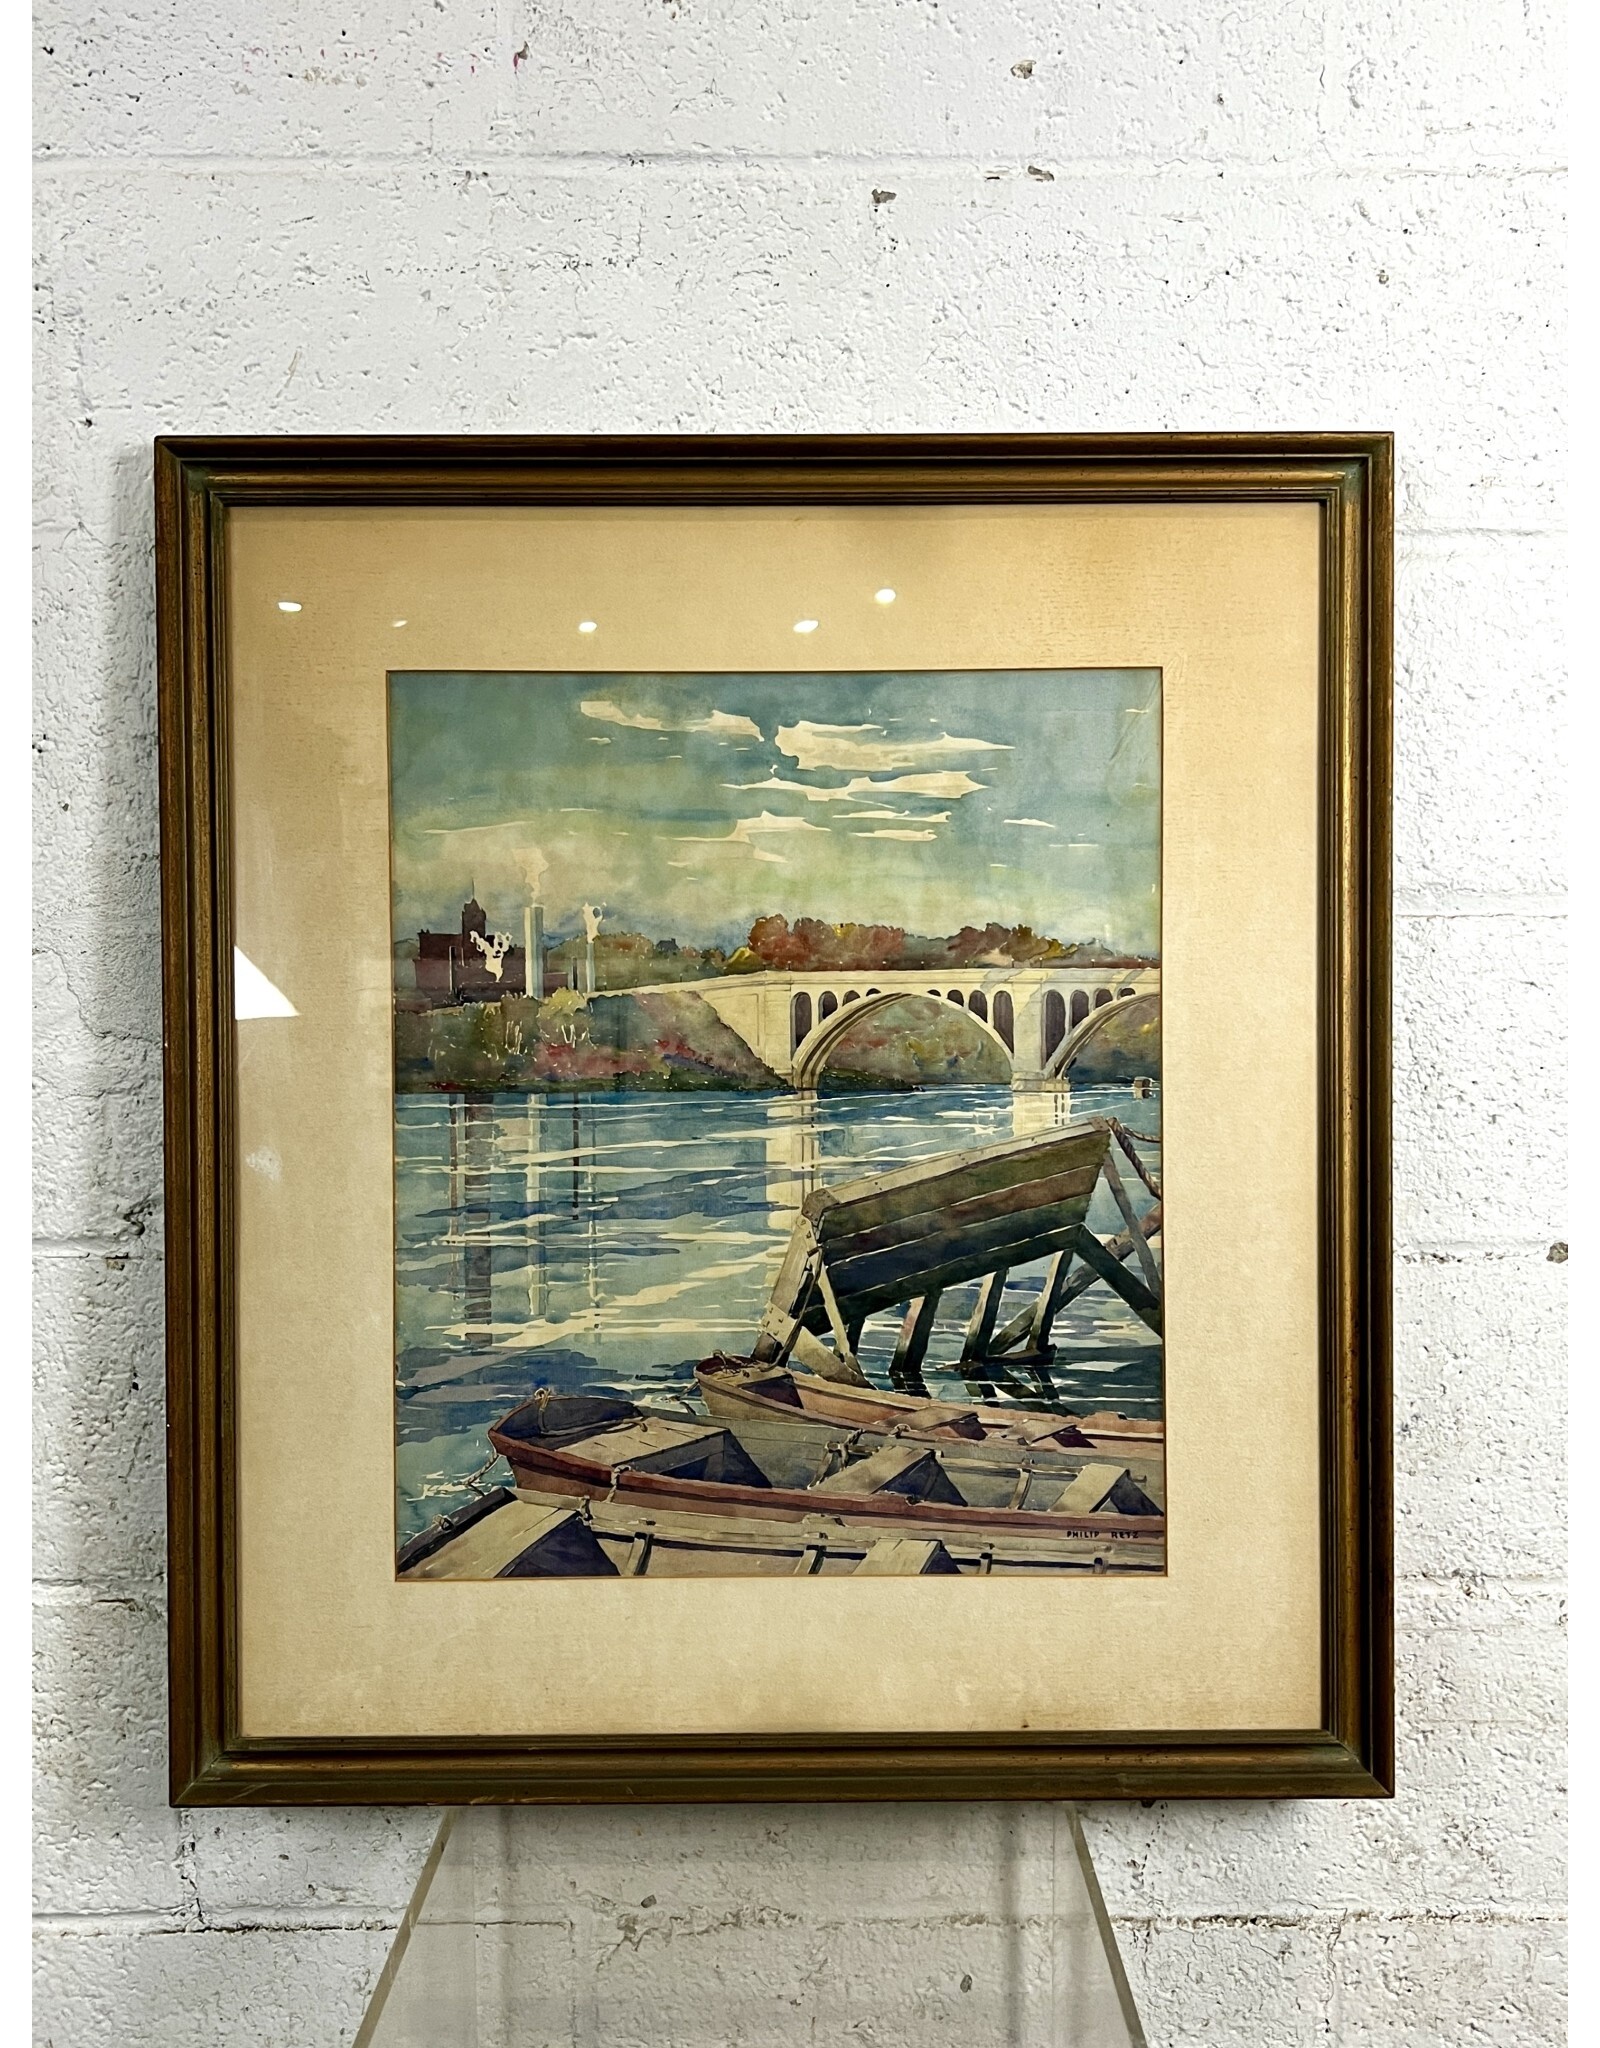 Pleasant Canal, framed watercolor painting, sgnd Philip Retz